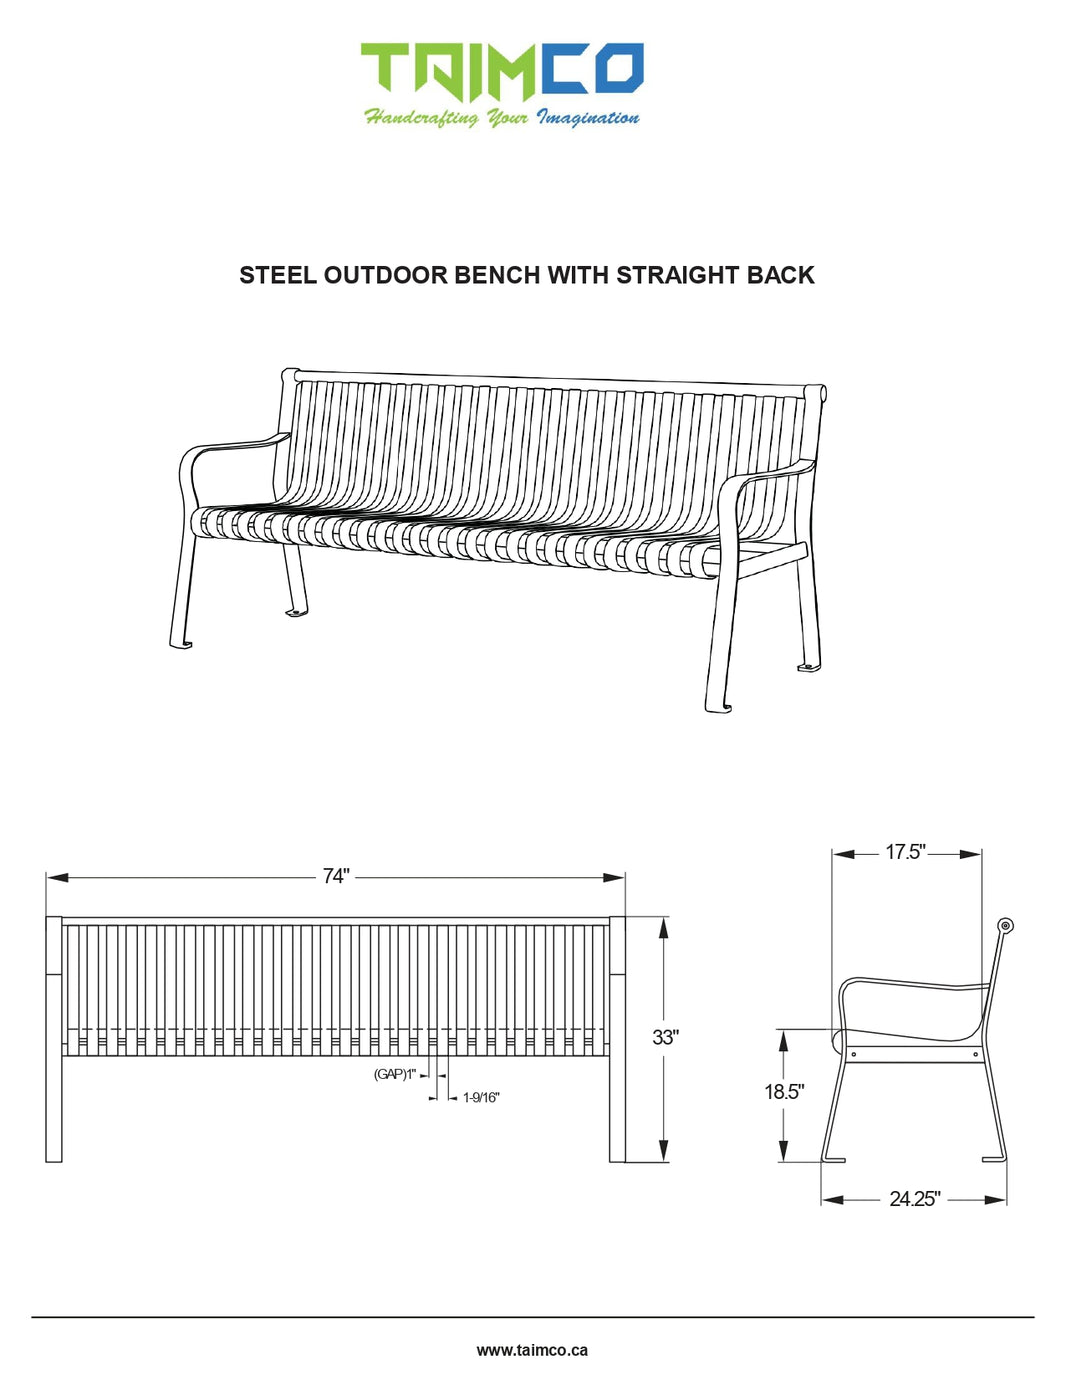 Pack of 5 Commercial metal Bench Top and Back Steel Slatted | Model MB217